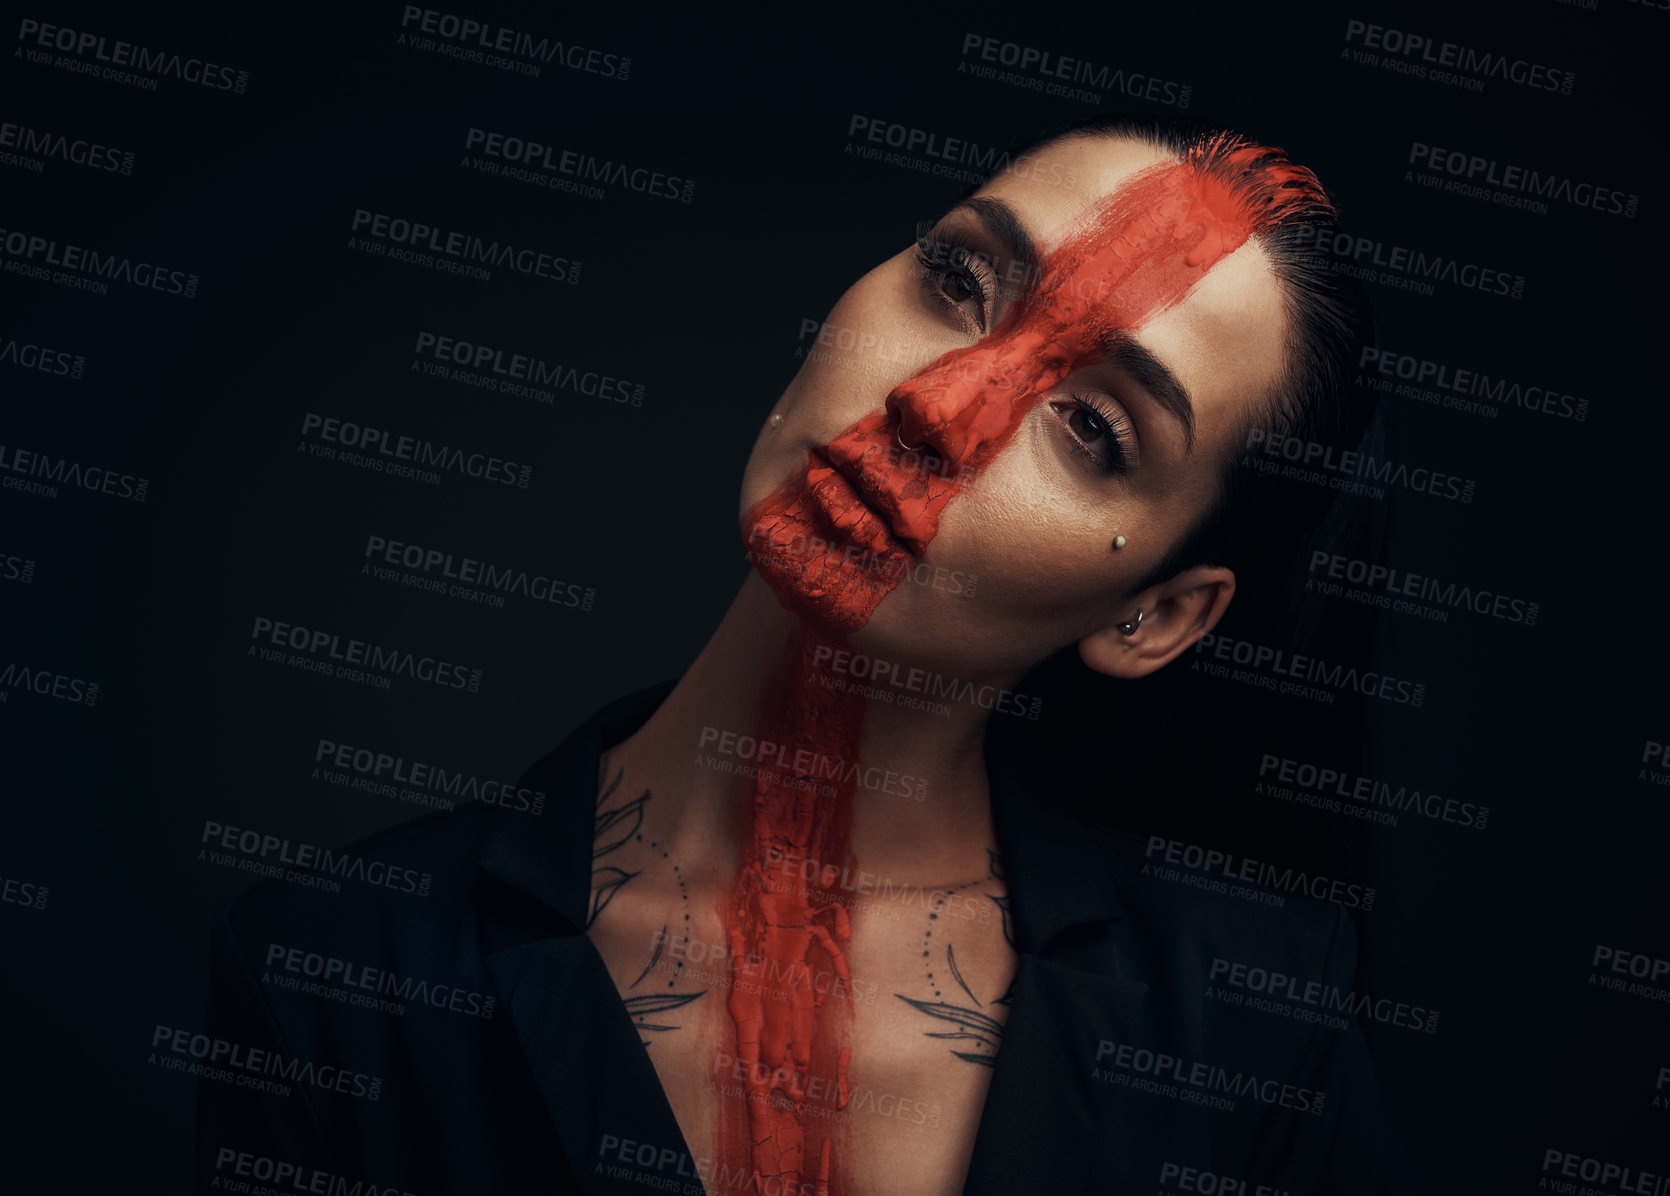 Buy stock photo Studio shot of a young woman posing with paint on her face on a black background